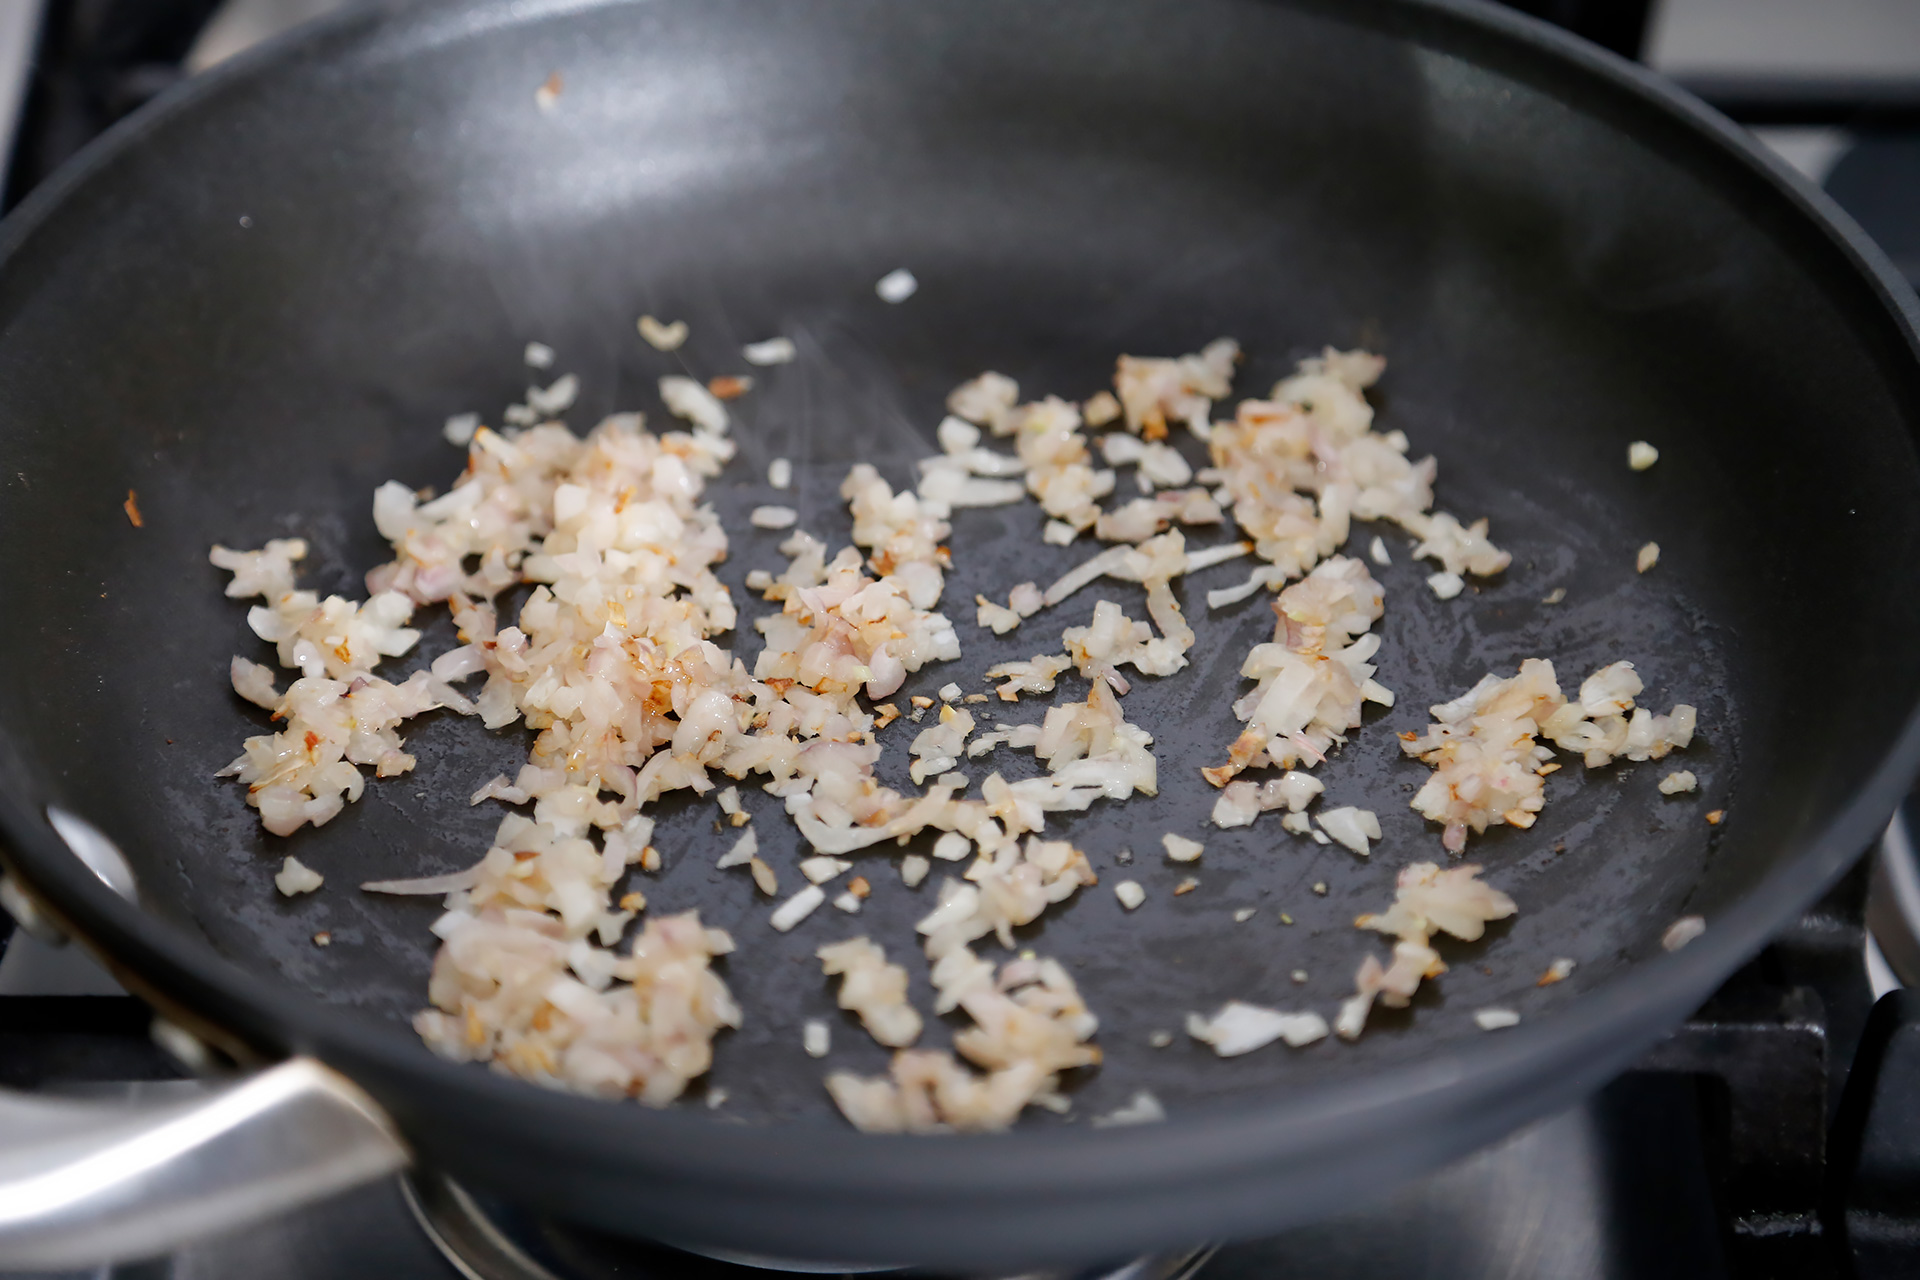 In a frying pan over medium heat, melt the butter. Add the shallots and a little sprinkle of salt. Cook, stirring, until tender, about 3 minutes, then transfer to the mixing bowl.